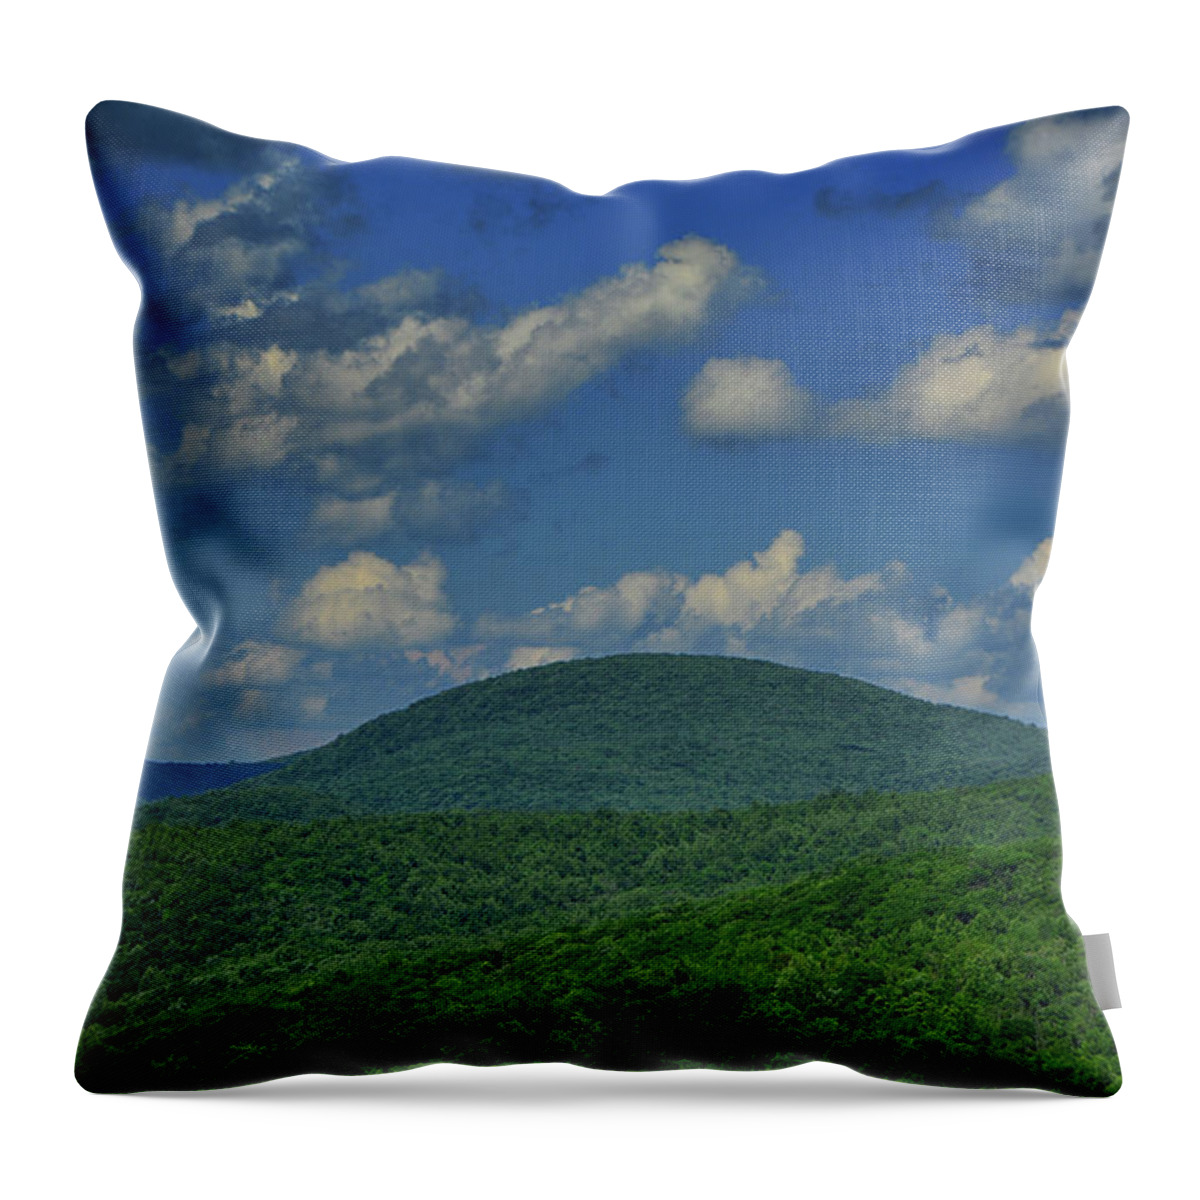 From Moormans Gap Throw Pillow featuring the photograph From Moormans Gap by Raymond Salani III